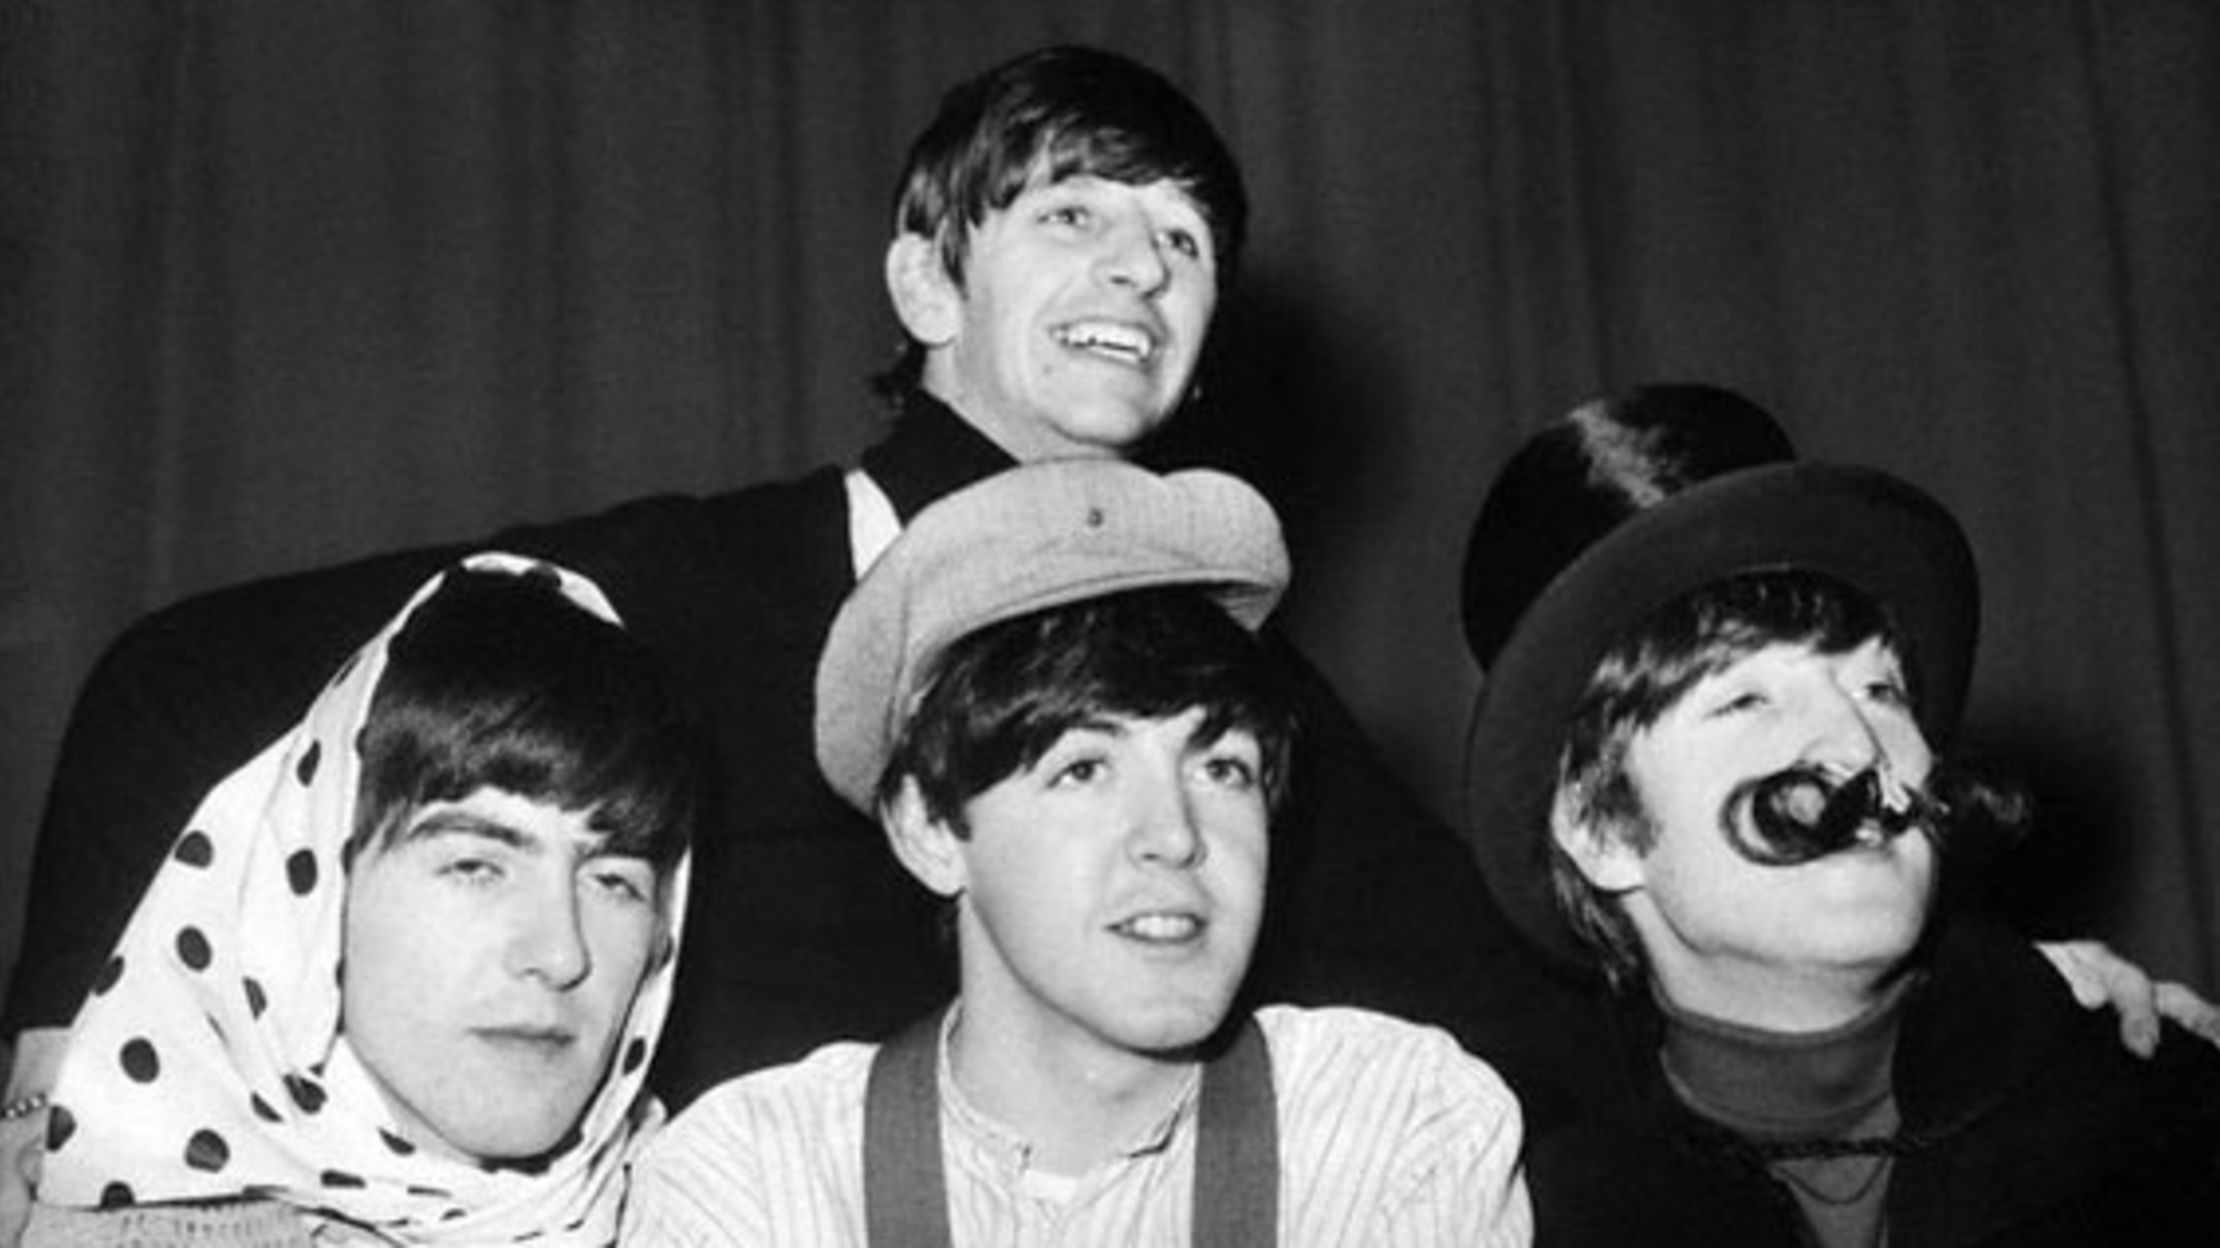 Beatles for Sale | The Beatles Wiki | FANDOM powered by Wikia